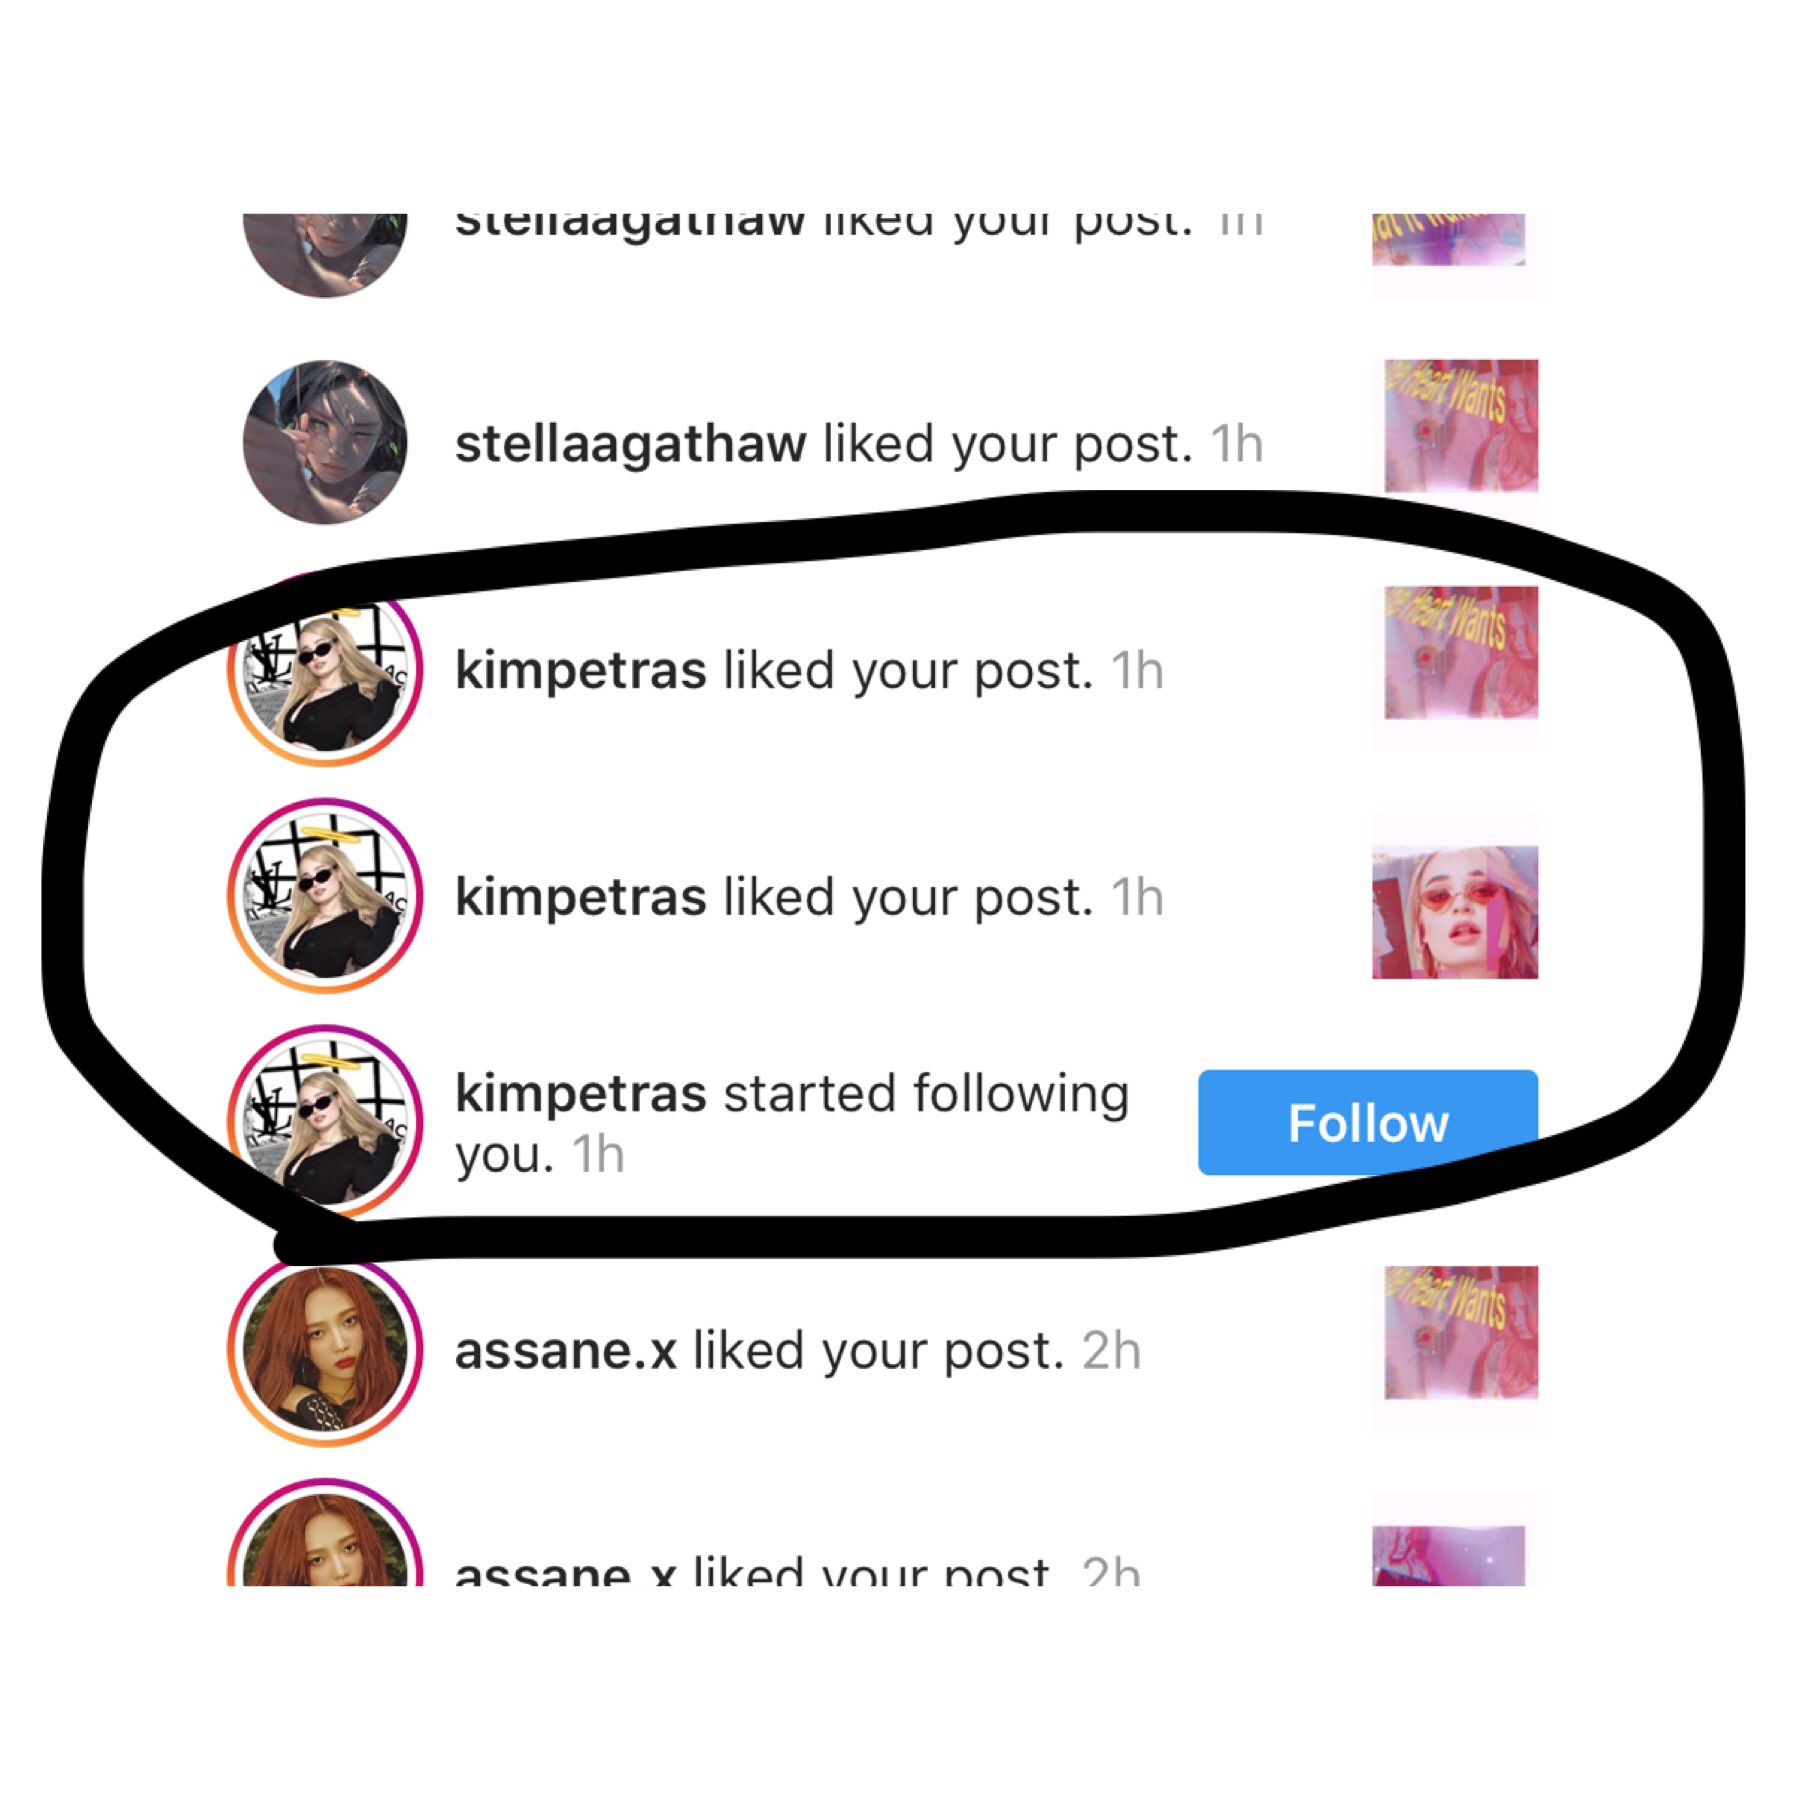 Guys Kim liked and followed on my insta is cryibg 